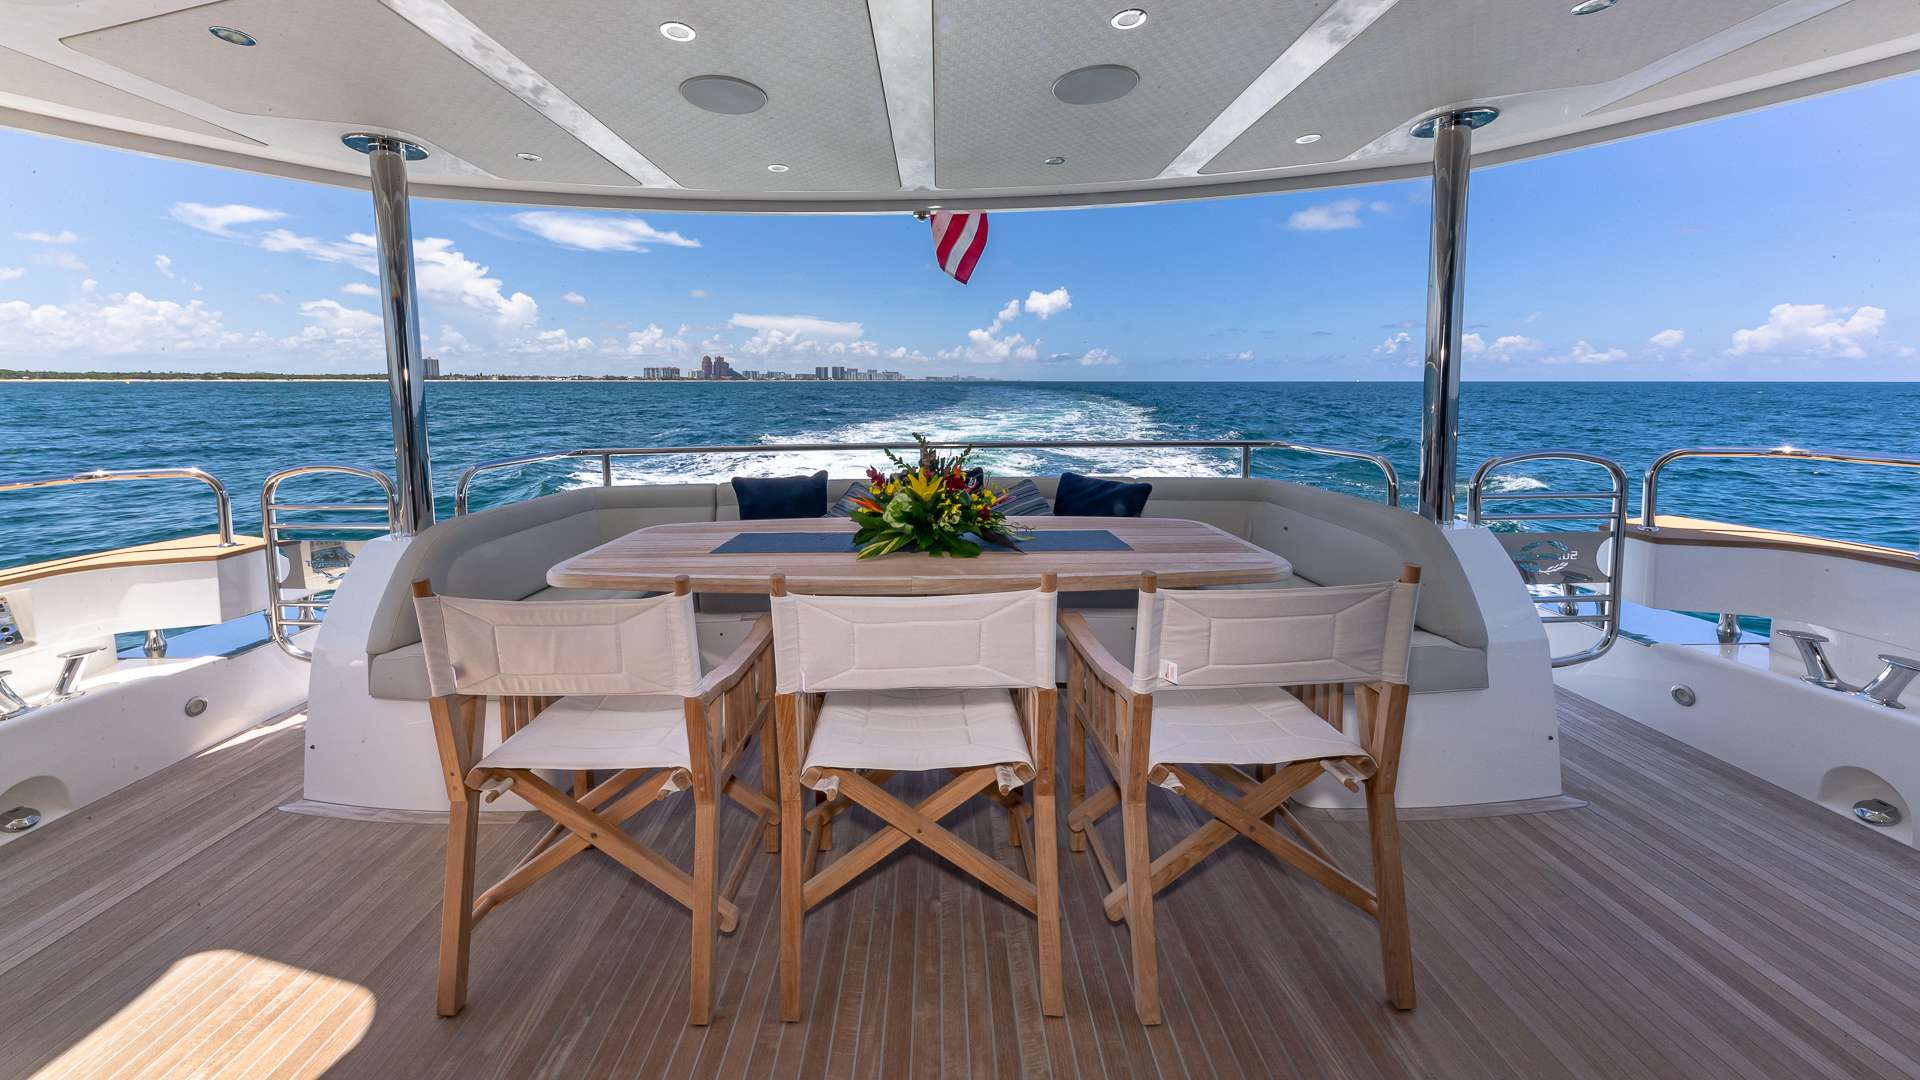 MIRRACLE Yacht Charter - Aft deck